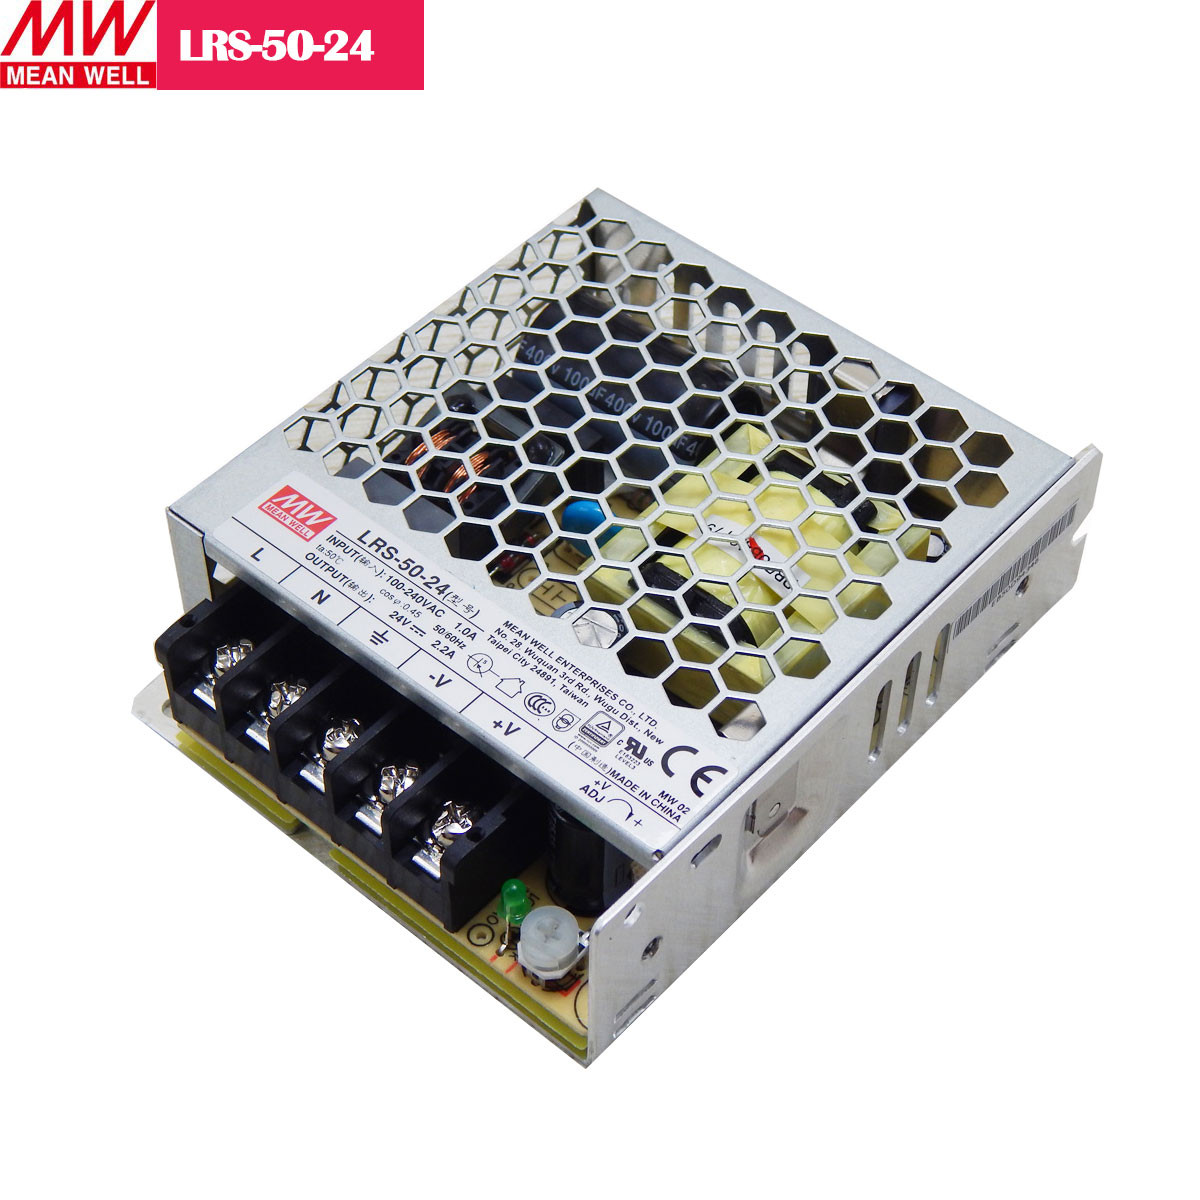 24V 2.2Amp 52.8W MEANWELL UL Certificated LRS series Switching Power Supply